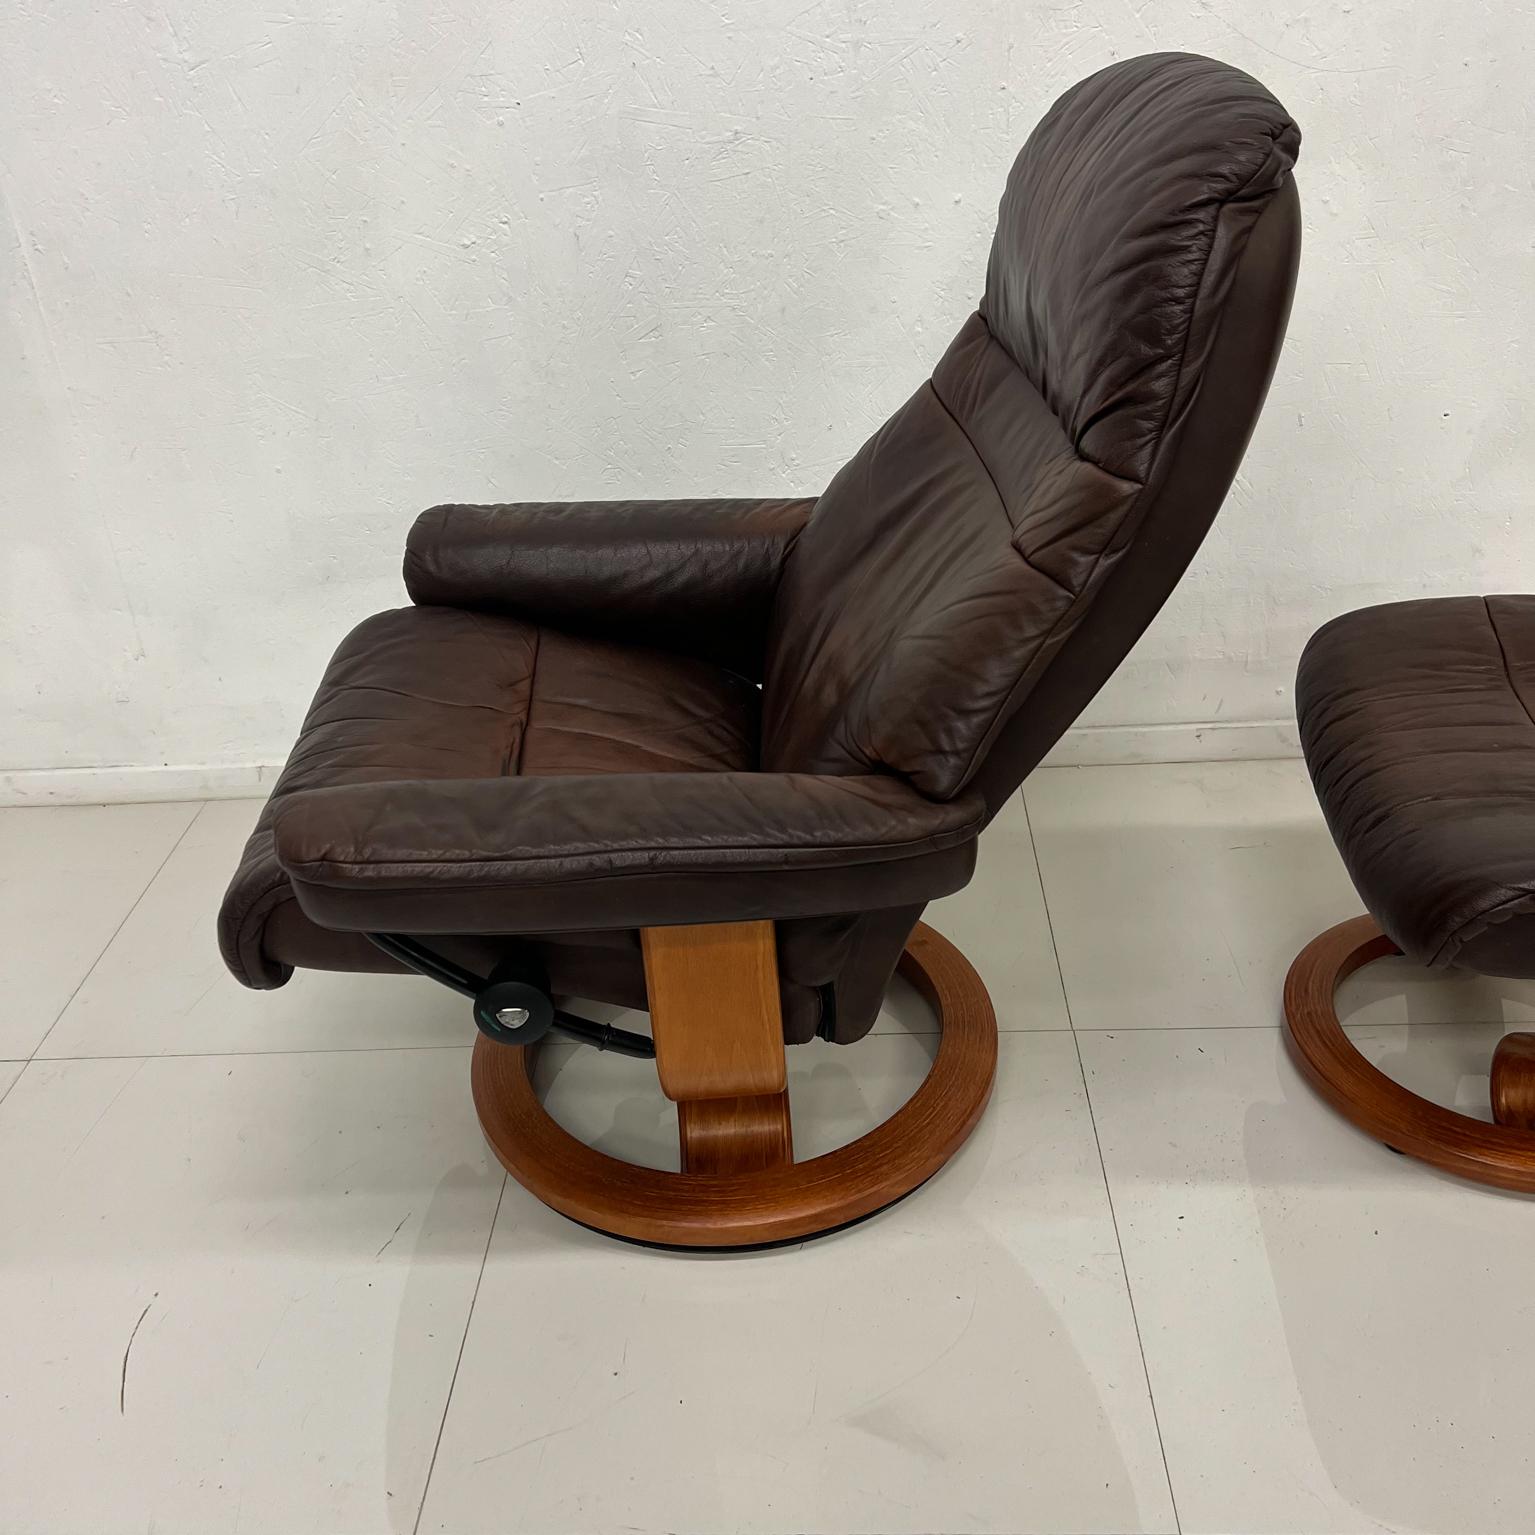 Late 20th Century 1990s Ekornes Stressless Brown Leather Comfort Recliner Lounge & Ottoman Norway